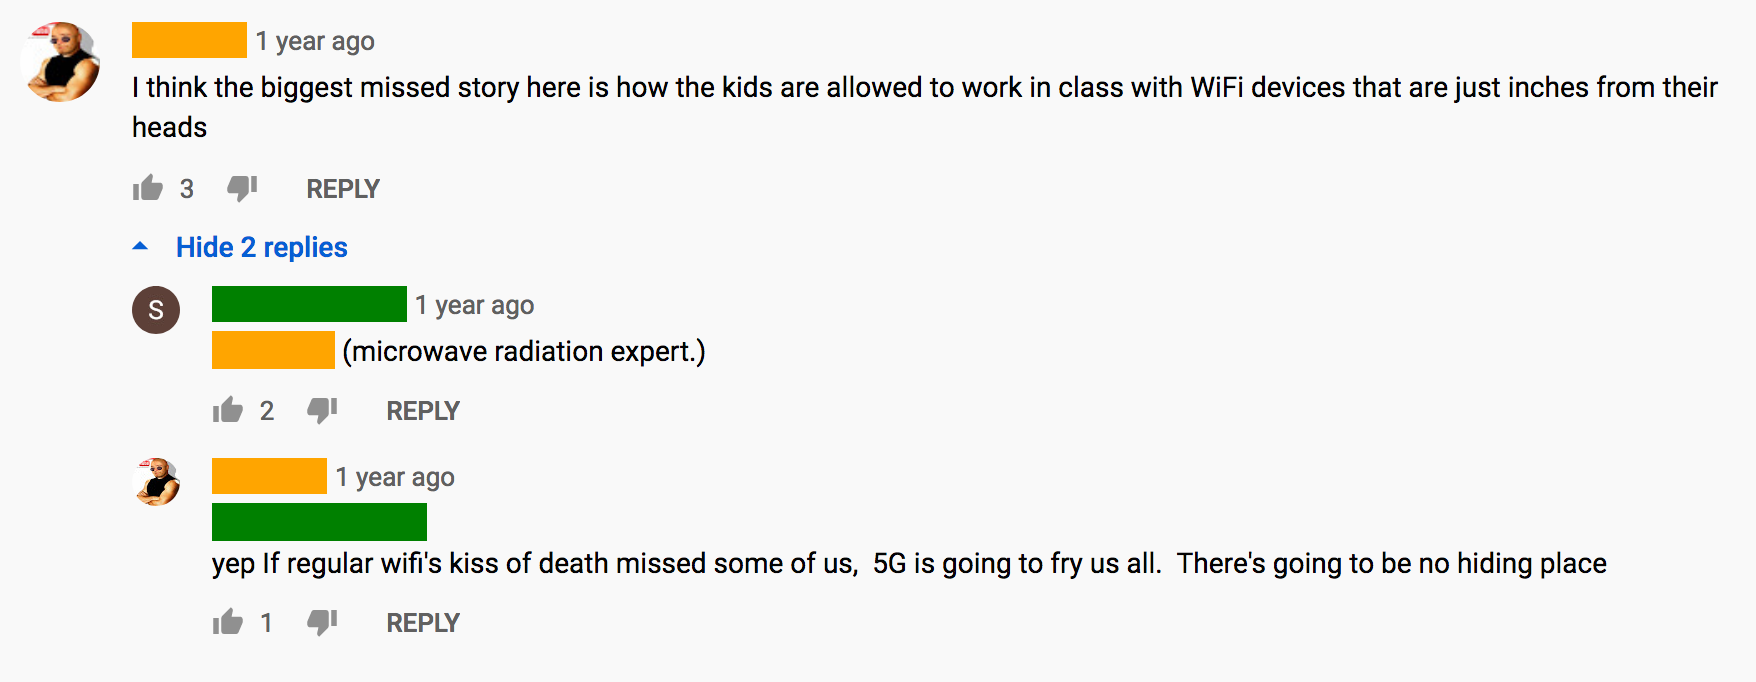 angle - 1 year ago I think the biggest missed story here is how the kids are allowed to work in class with WiFi devices that are just inches from their heads it 3 Hide 2 replies 1 year ago |microwave radiation expert. id 2 1 year ago yep If regular wifi's